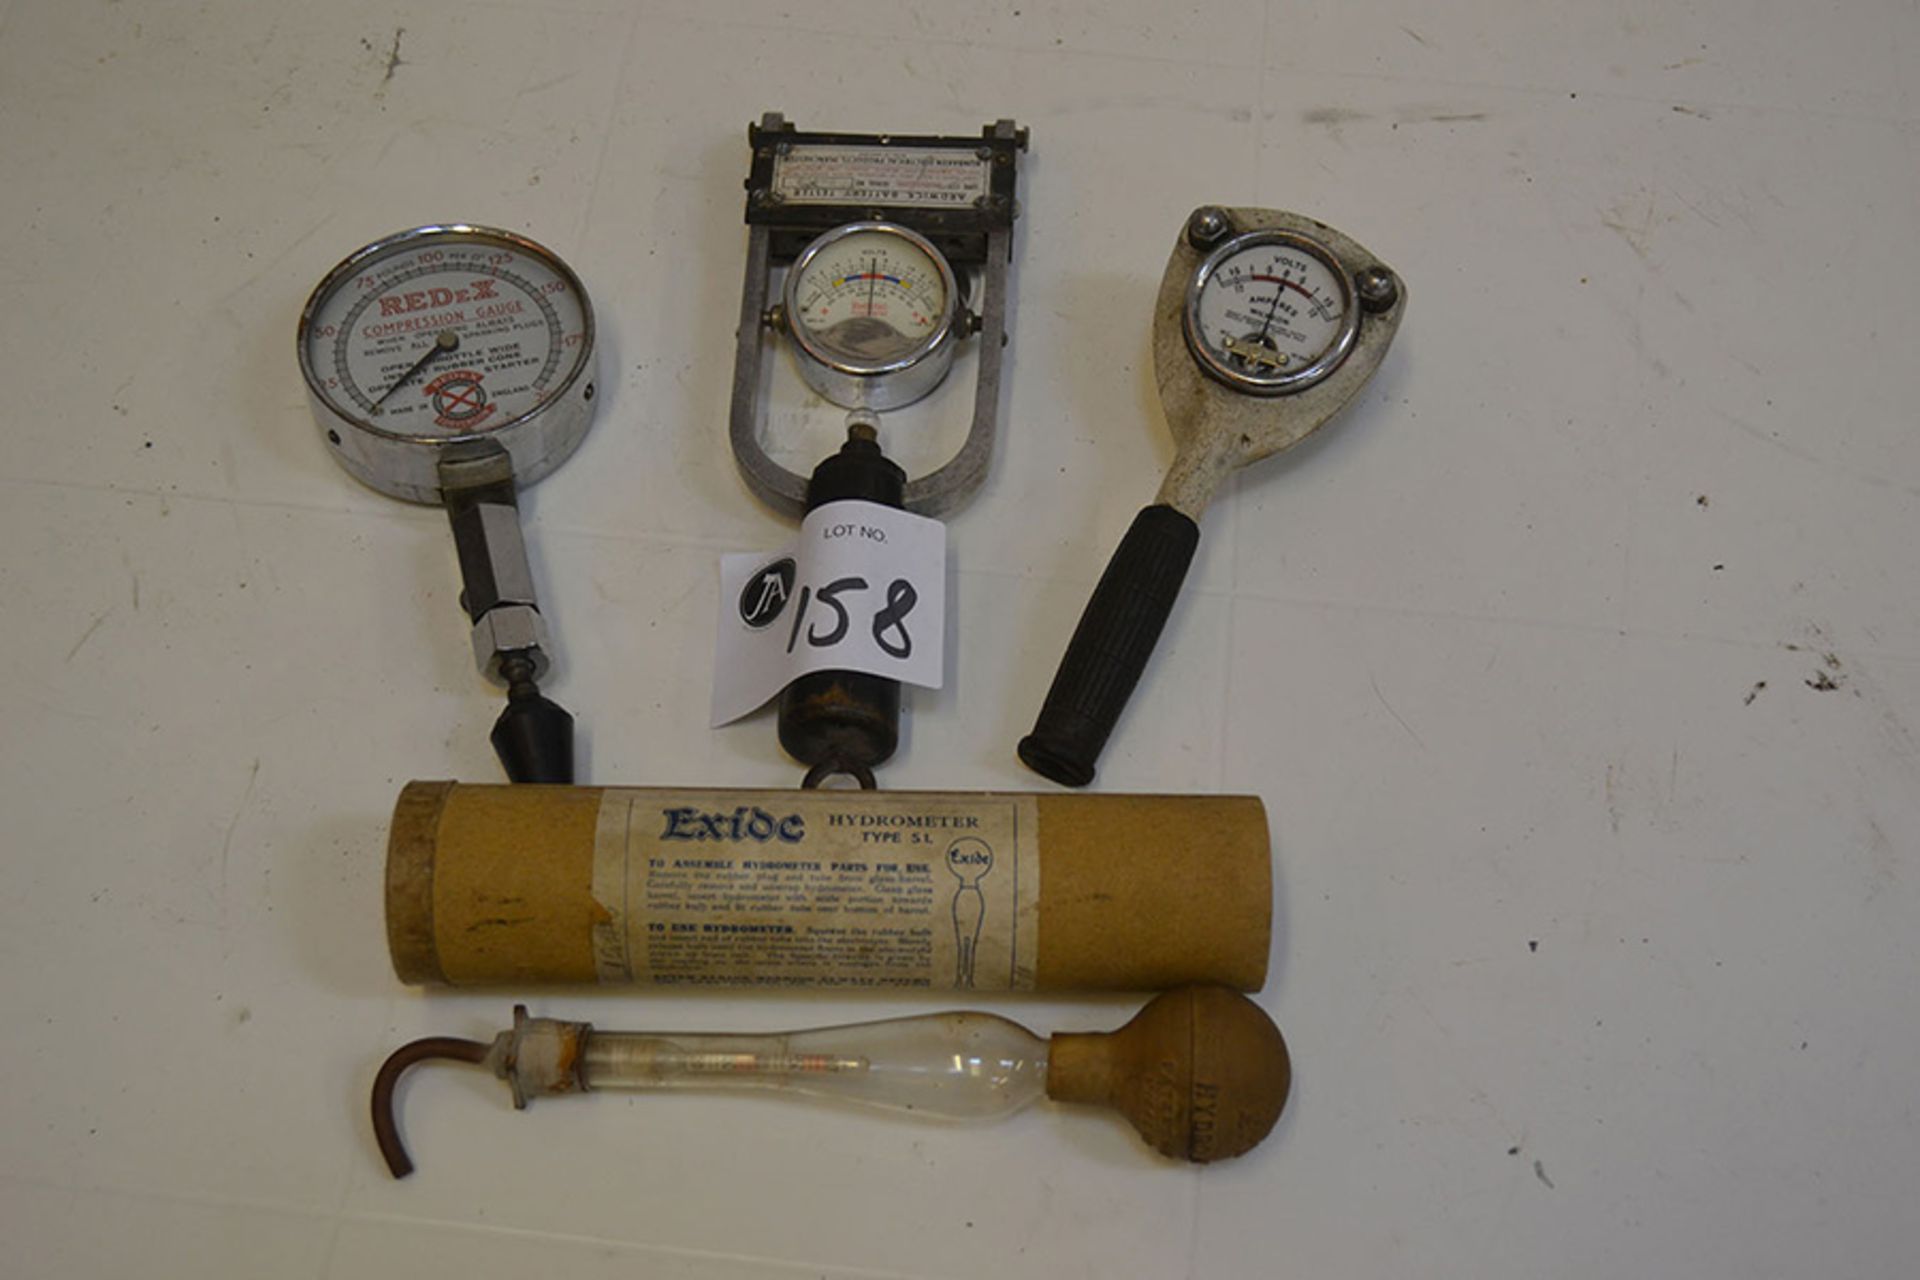 Two battery testers, hydrometer and compression gauge